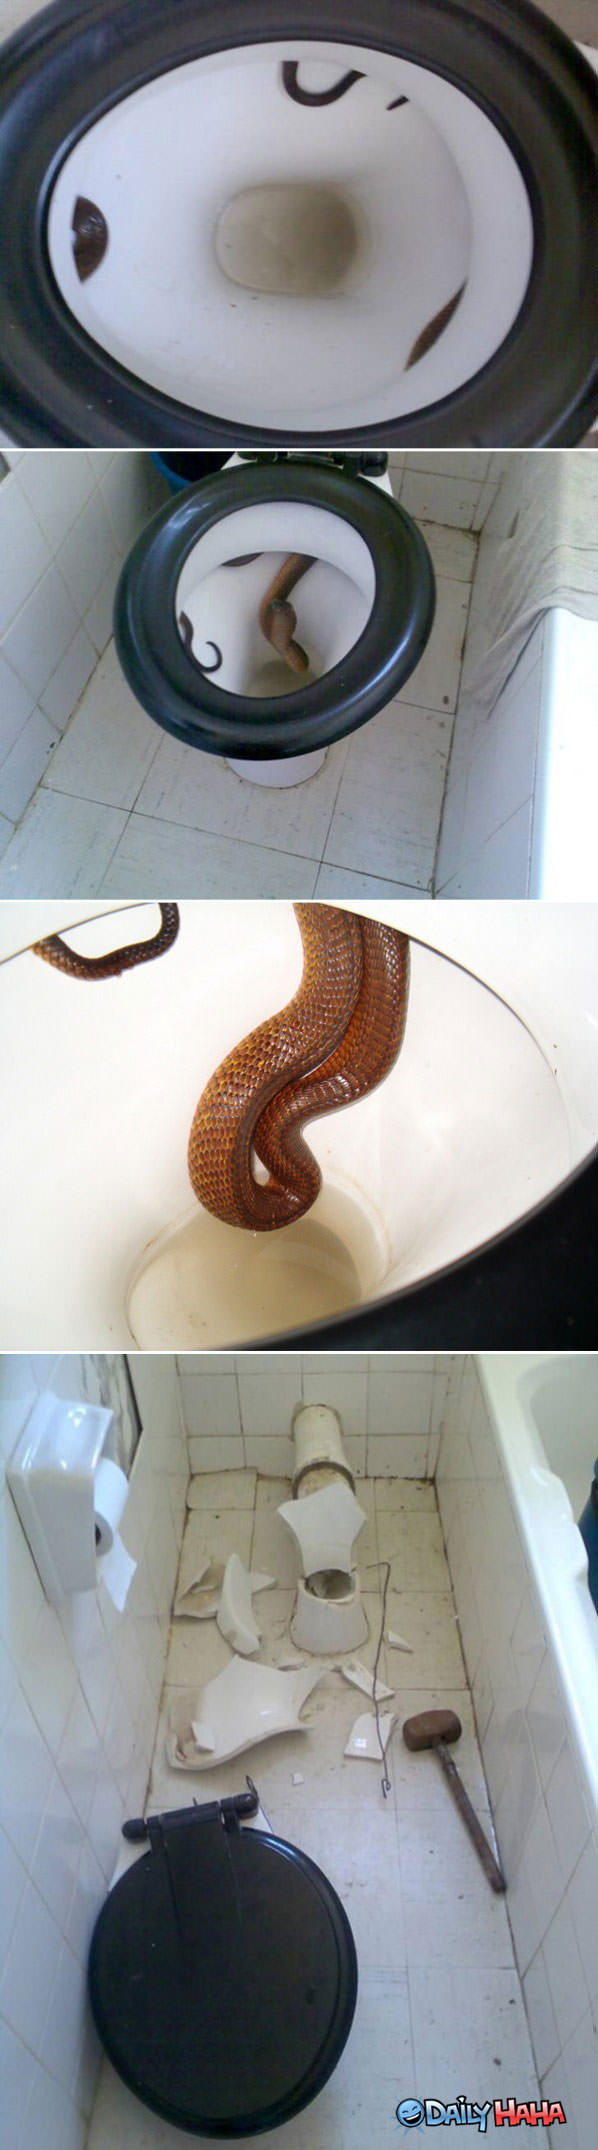 Toilet Snake funny picture